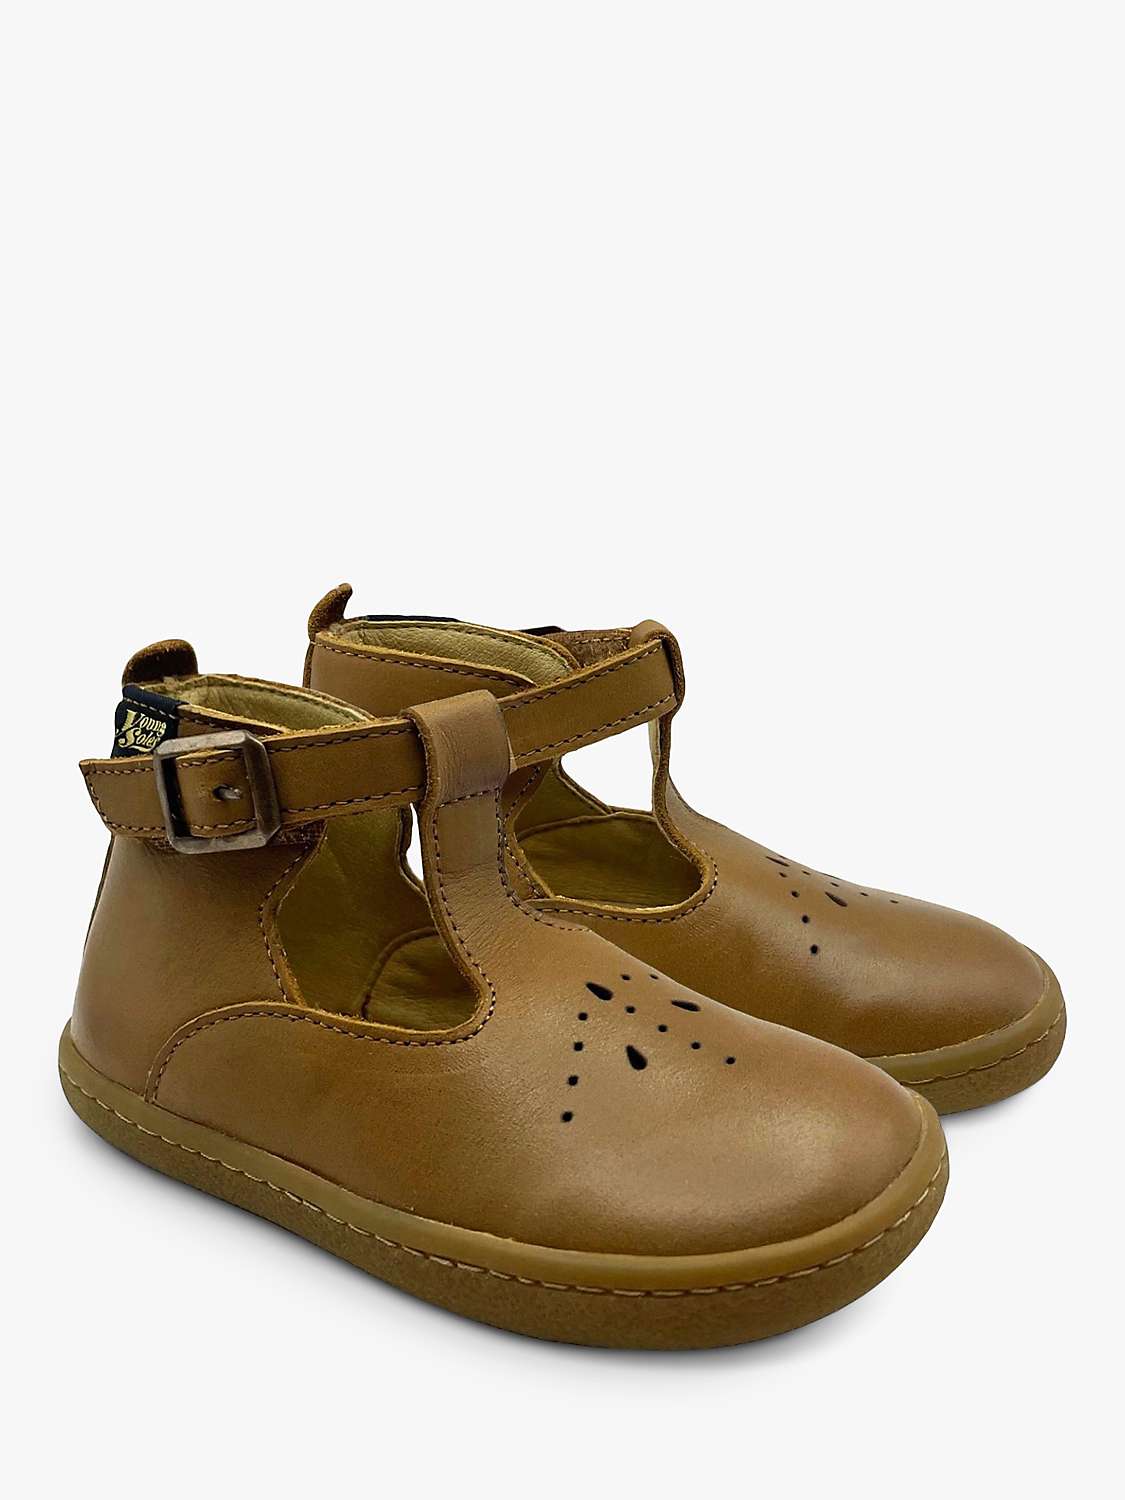 Buy Young Soles Kids' Leather Lark T-Bar Boots Online at johnlewis.com